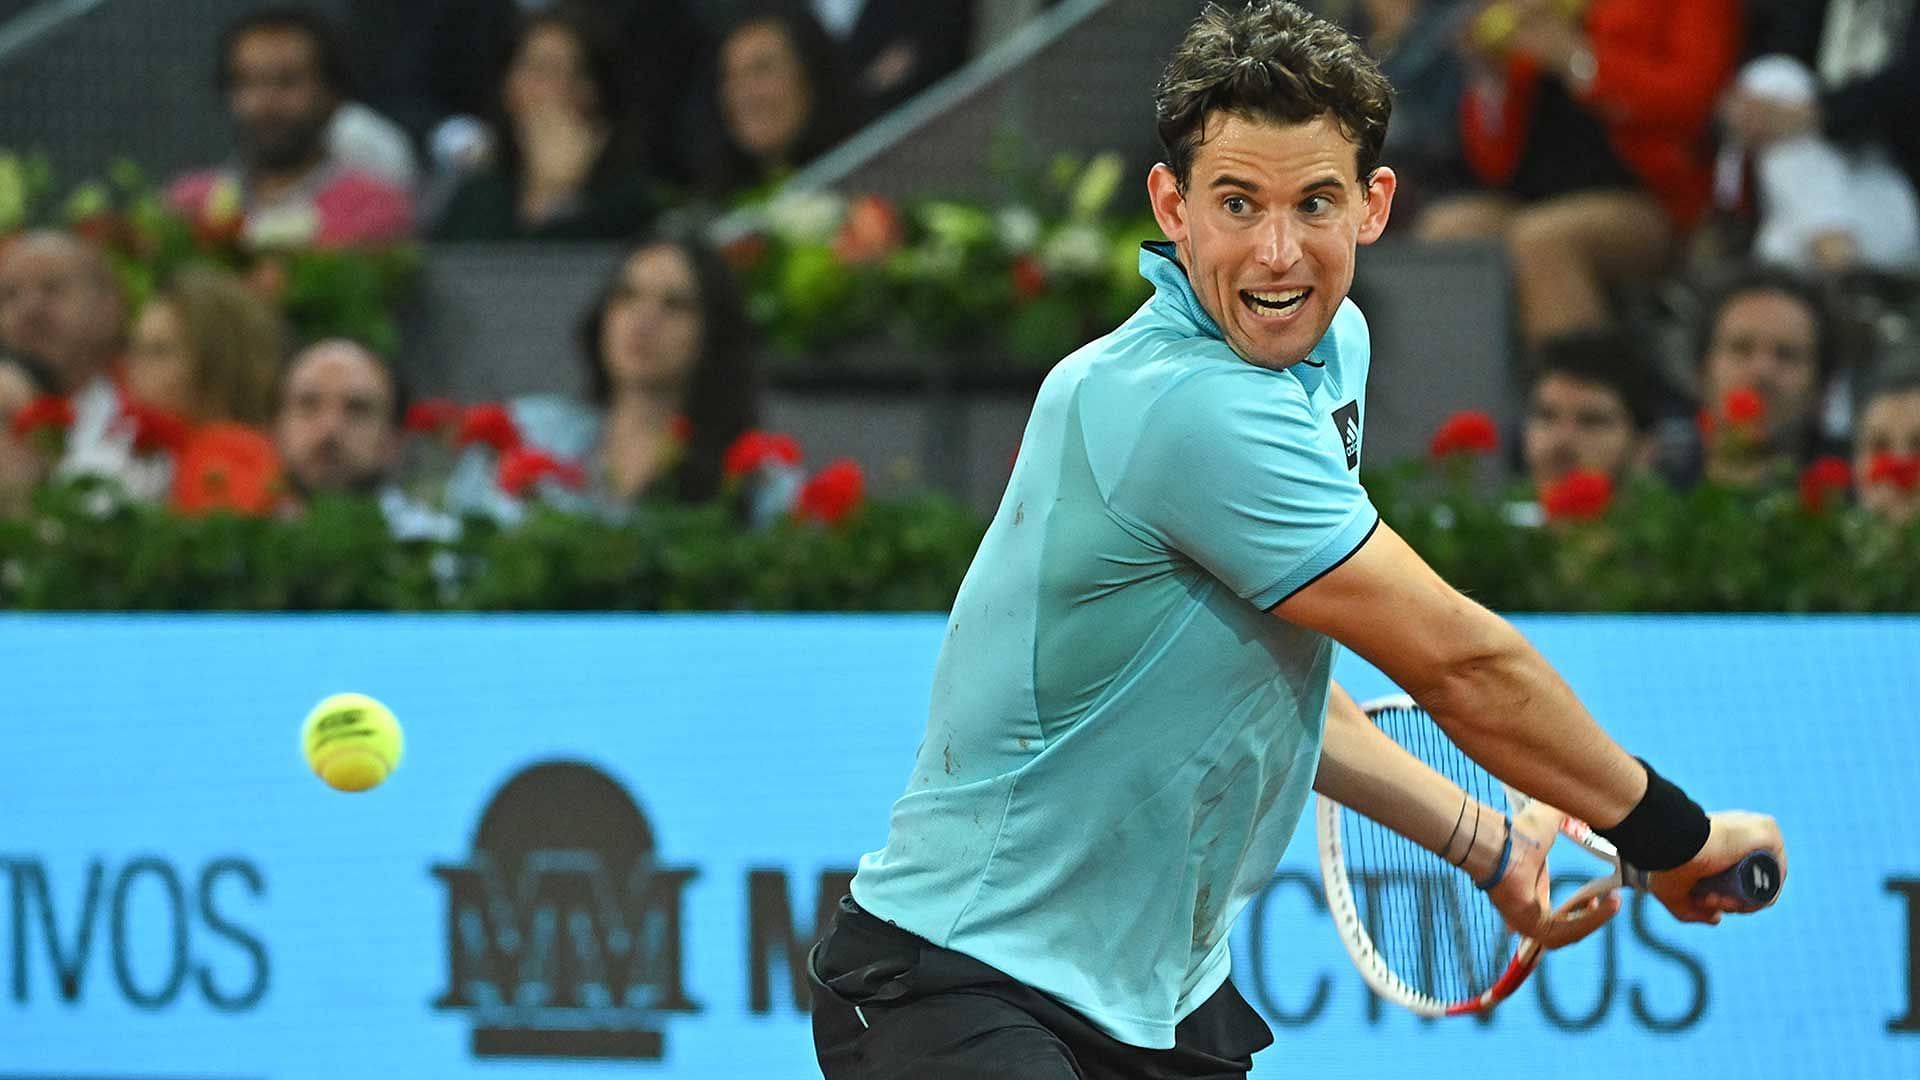 Dominic Thiem had to battle hard to ensure the win on Tuesday